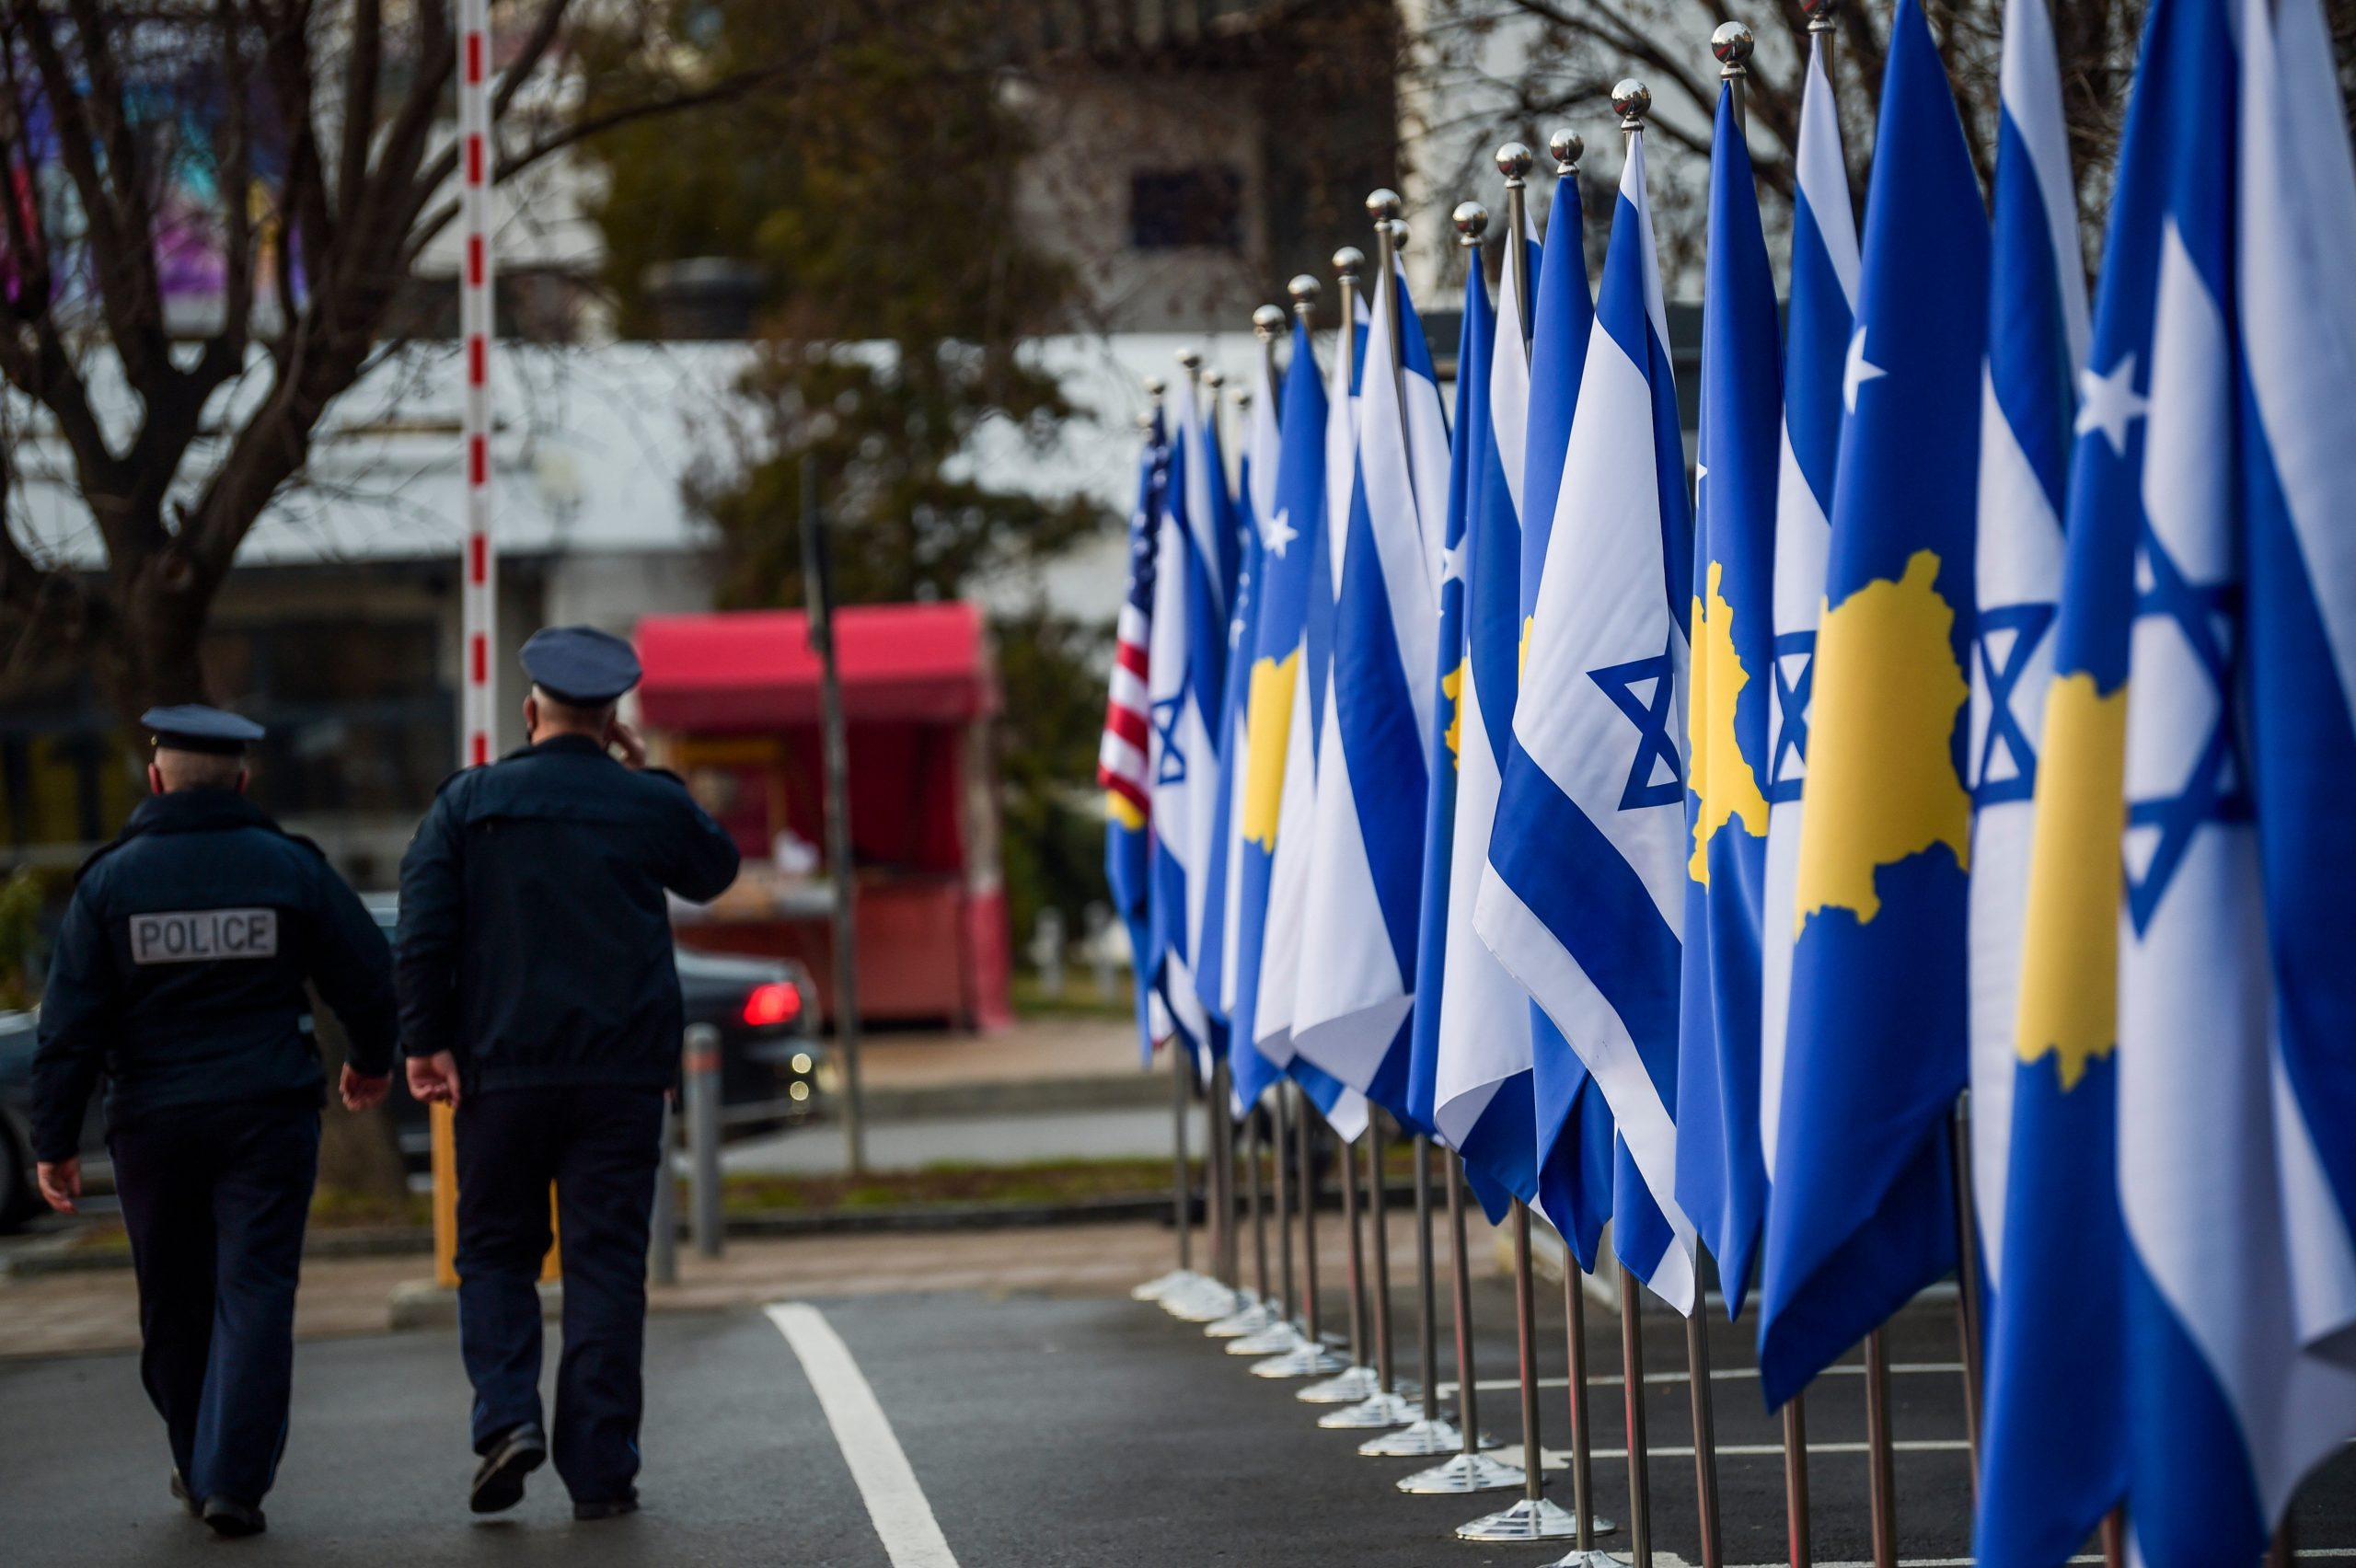 Israel and Kosovo recognise each other, former to set up embassy in Jerusalem